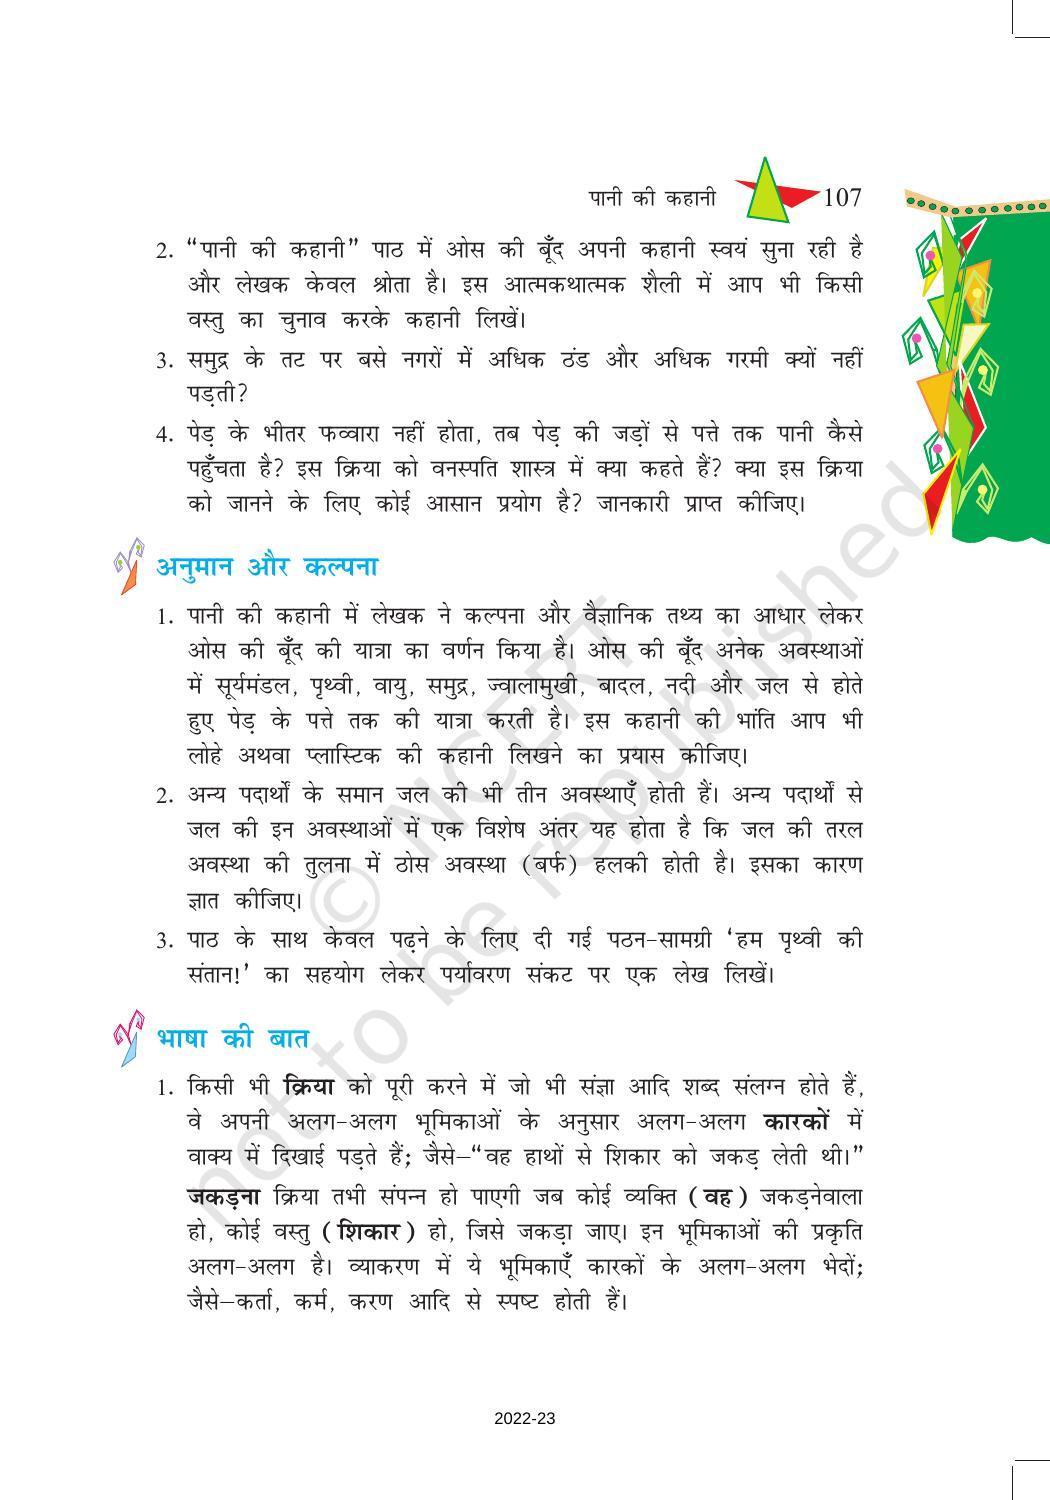 NCERT Book for Class 8 Hindi Vasant Chapter 16 पानी की कहानी - Page 10